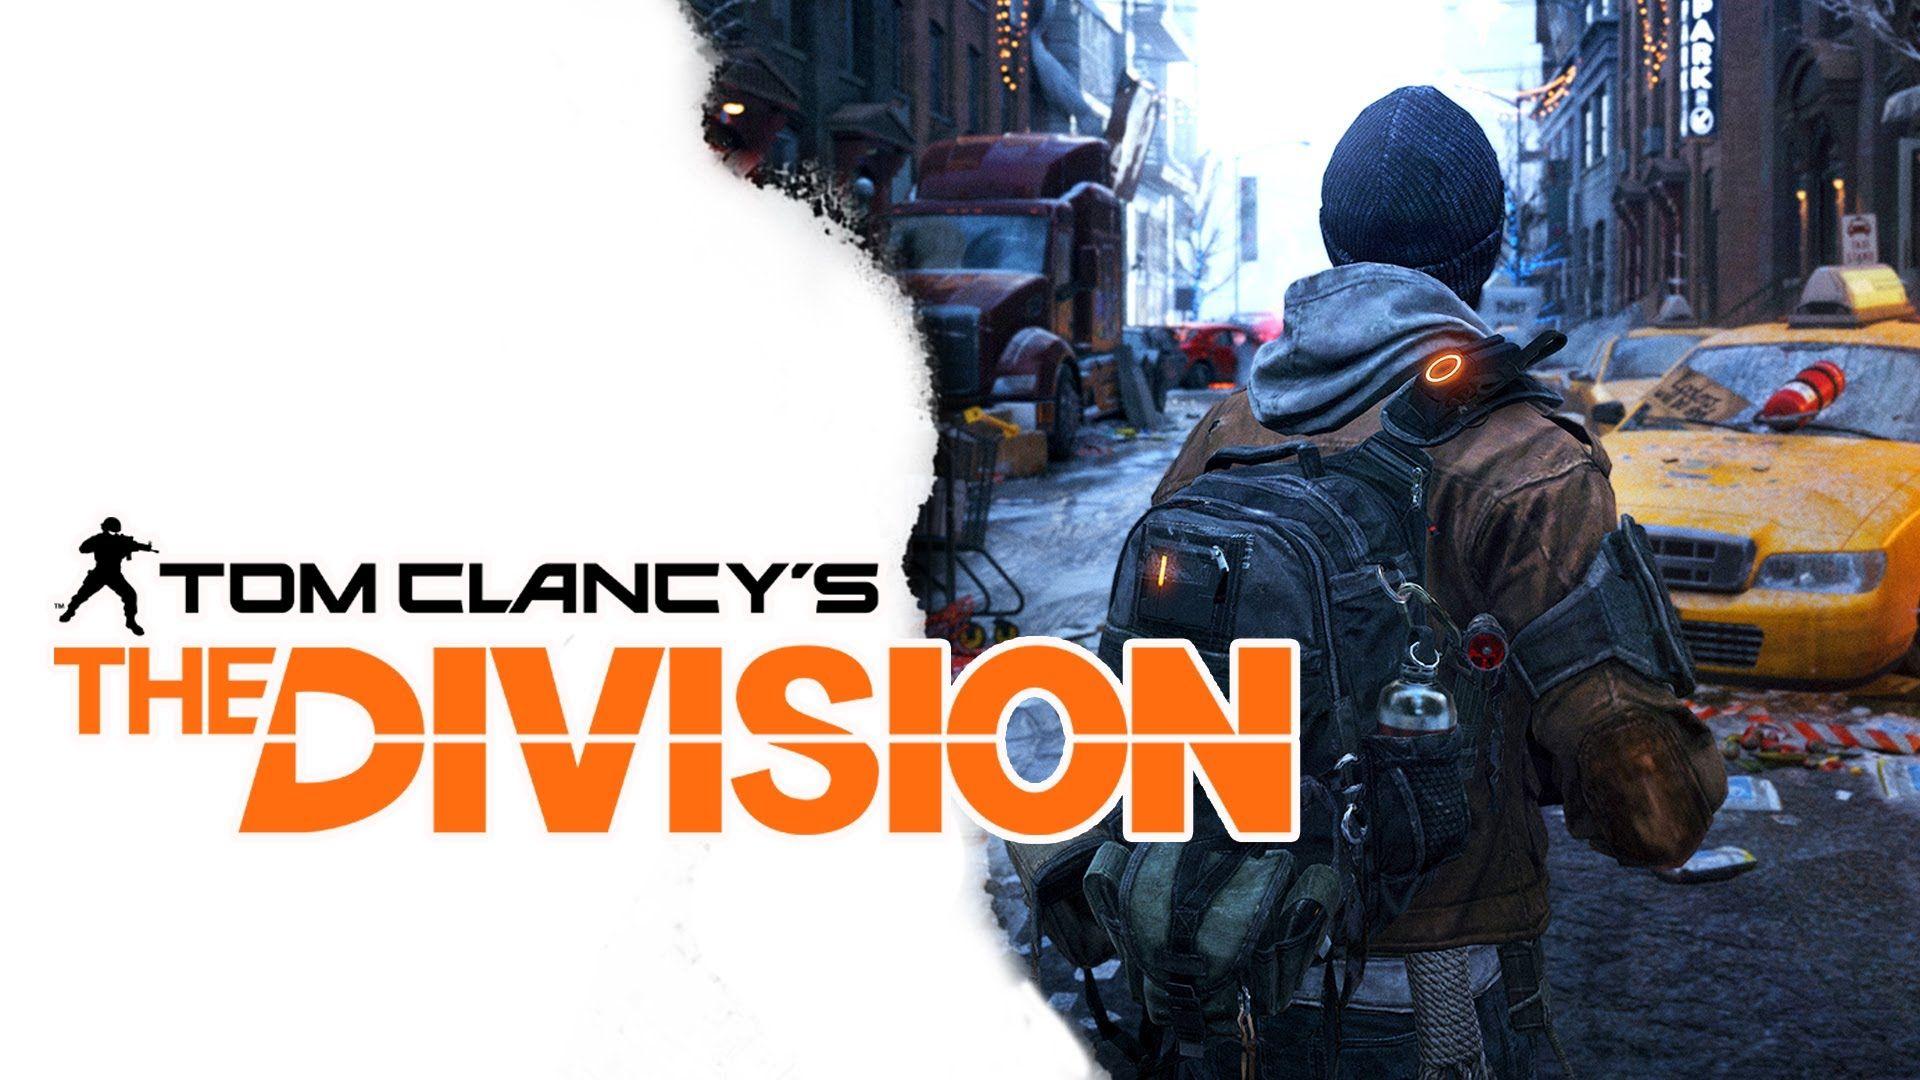 The division, Wallpaper and Division